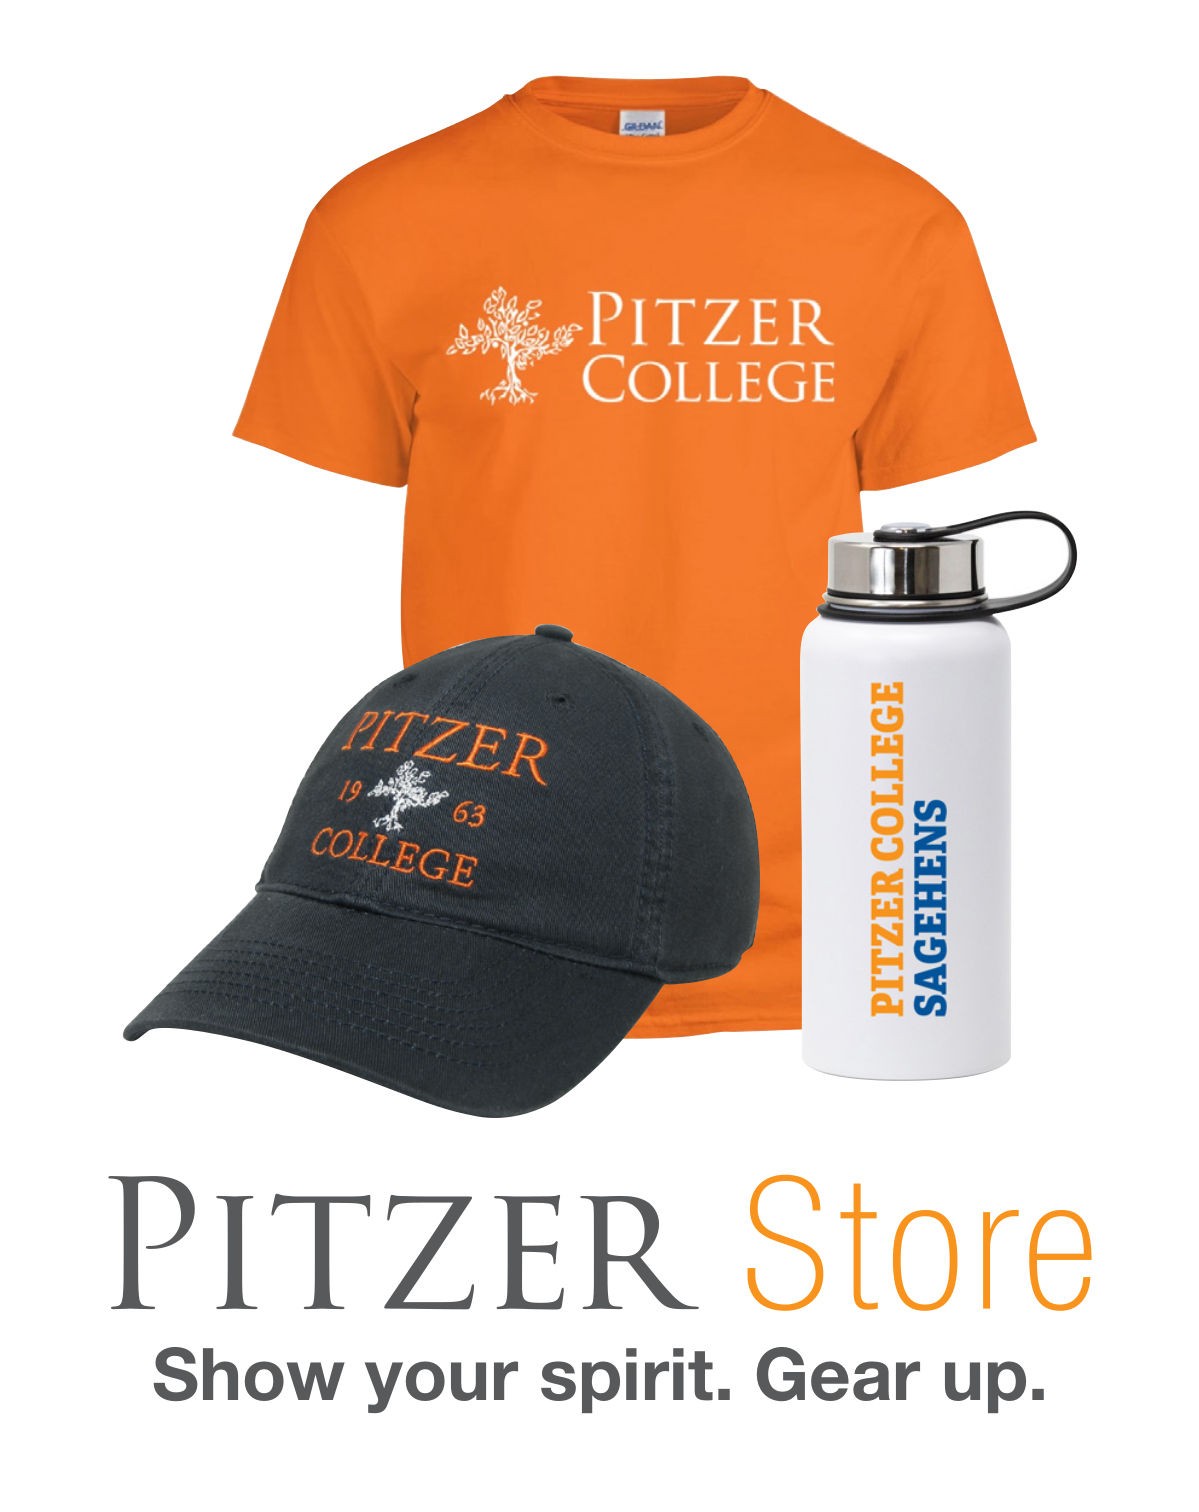 Pitzer Store